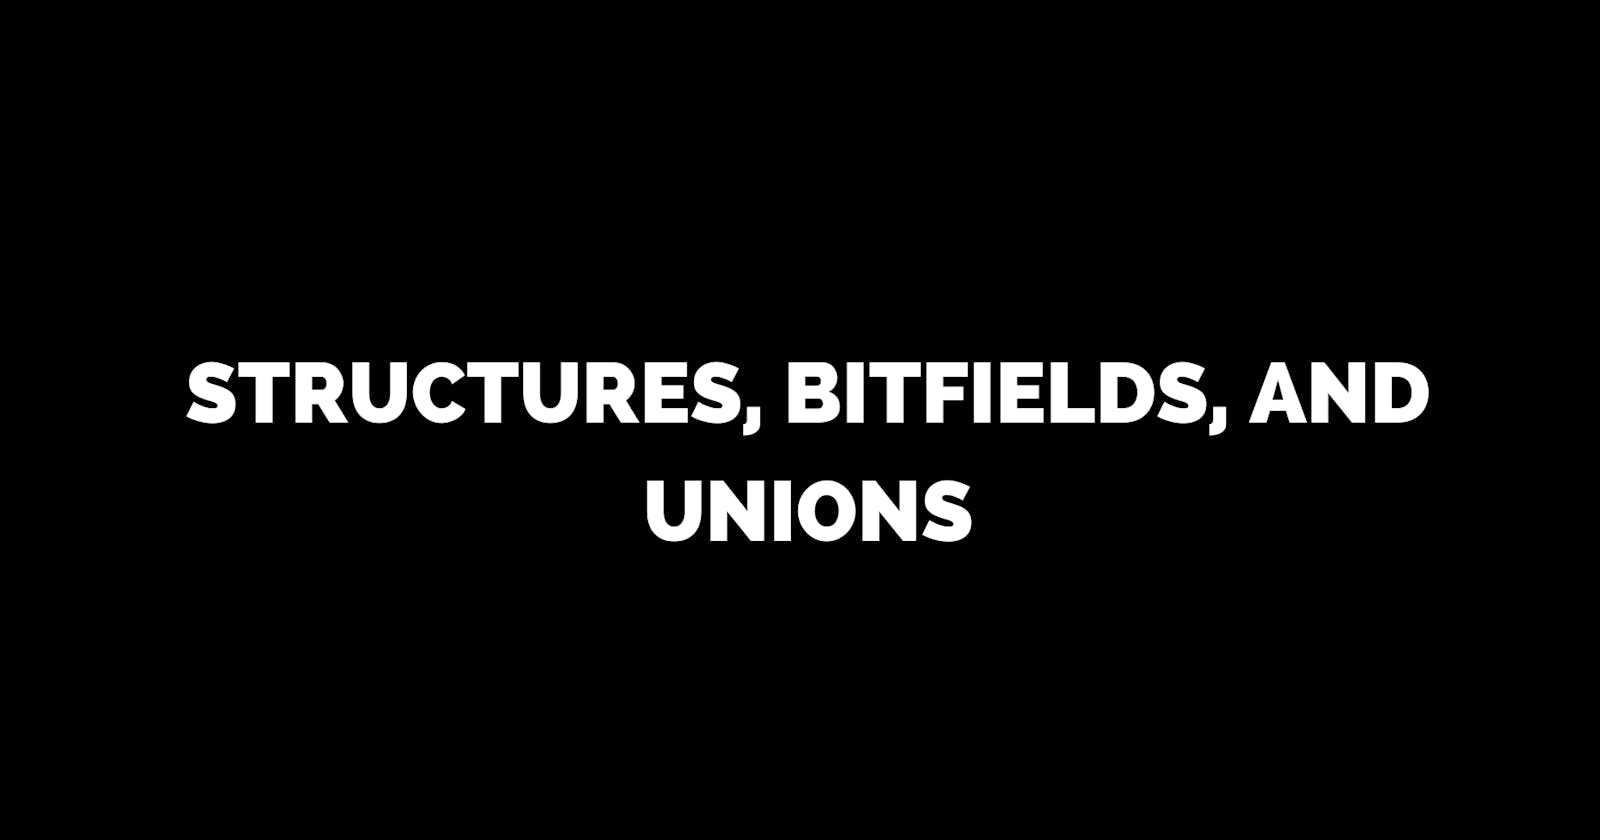 Structures, Bitfields, and Unions